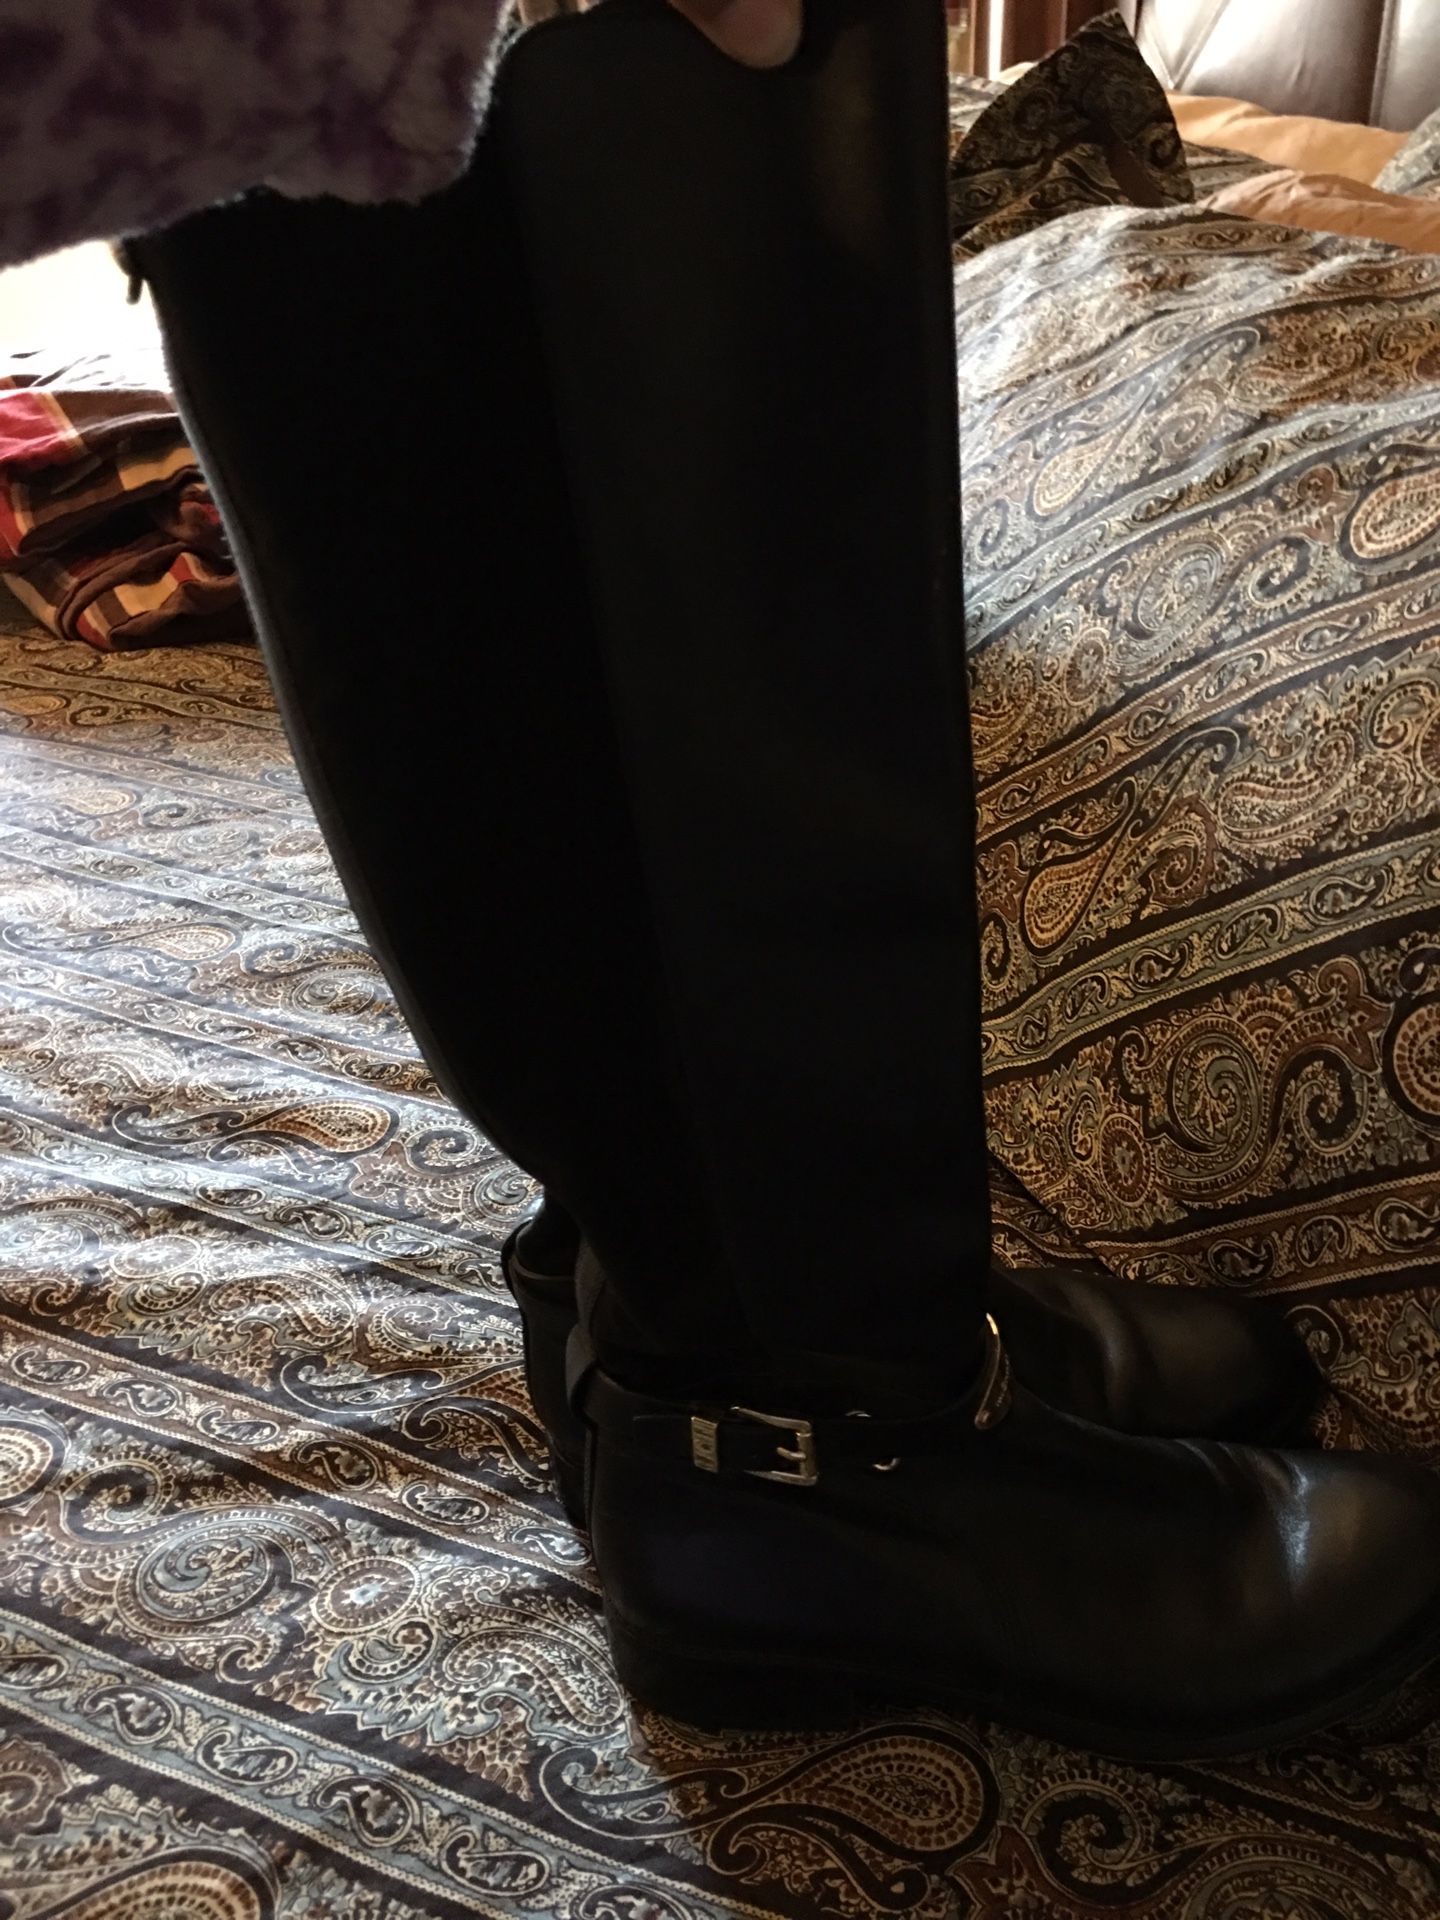 Black boot 👢 size 61-2 Michael kors perfect condition